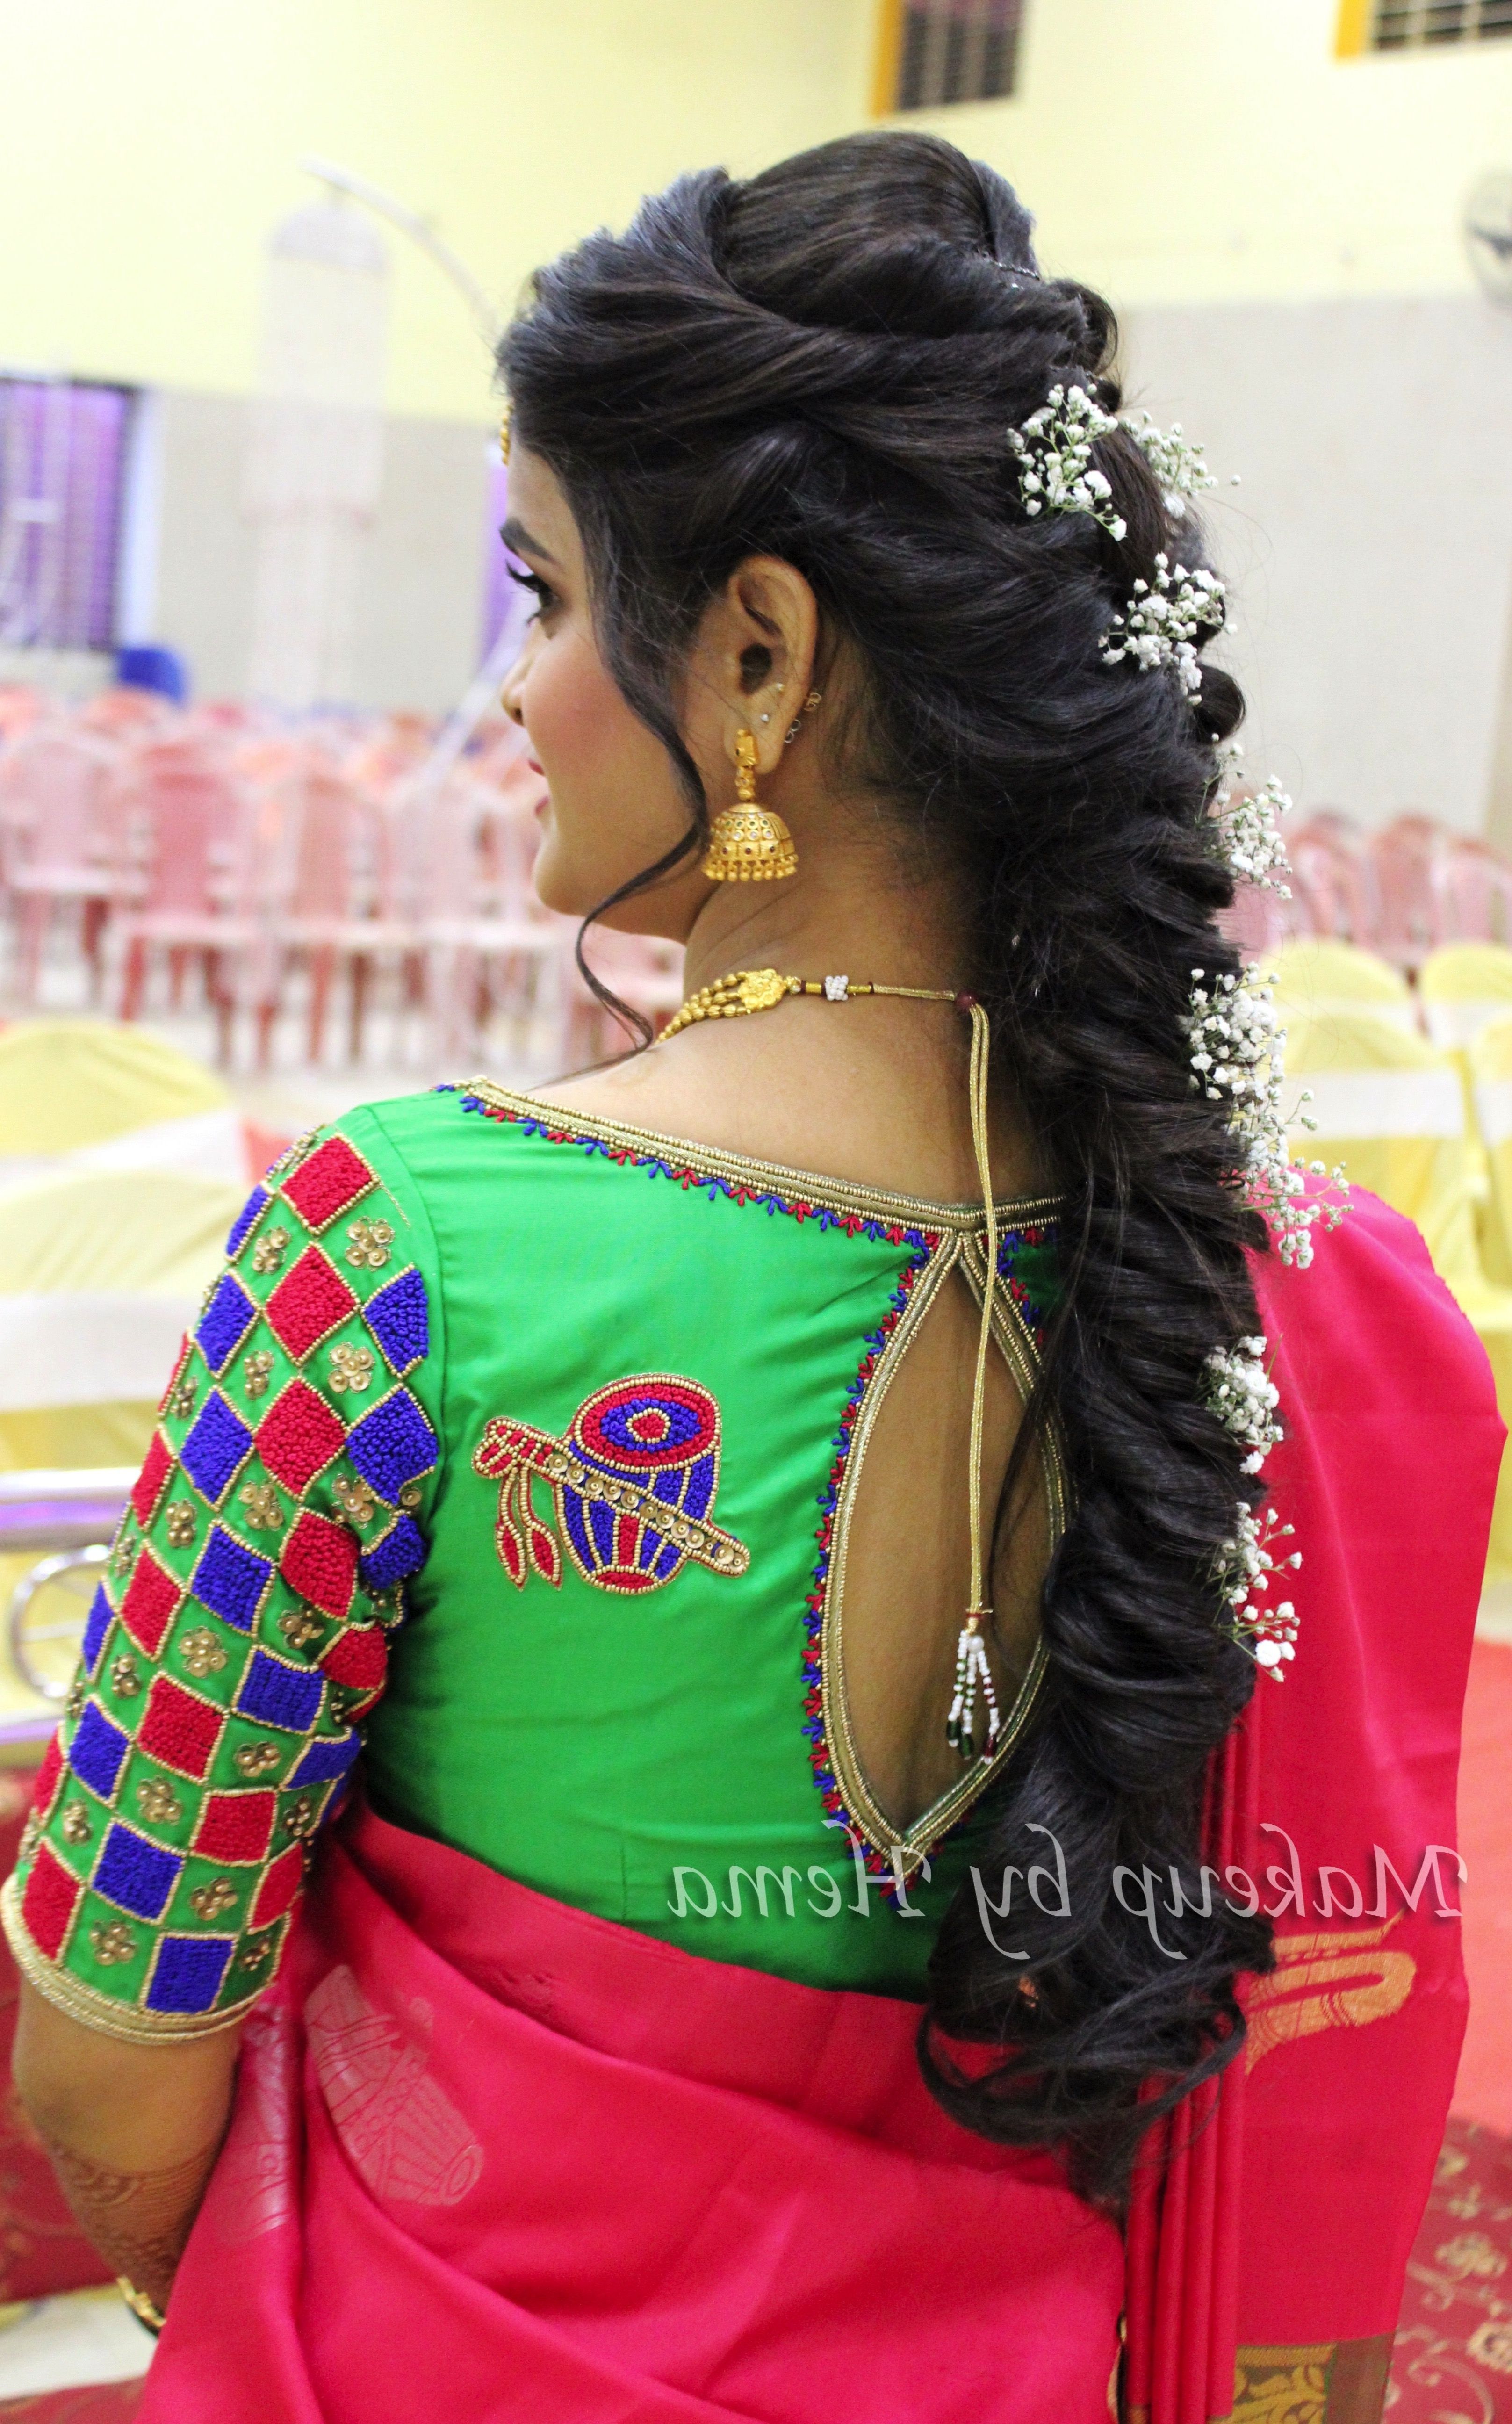 Hairstyles For Indian Wedding, Messy Braid, Bridal Braided Hairstyle In Widely Used Braided Hairstyles For Long Hair Indian Wedding (View 10 of 15)